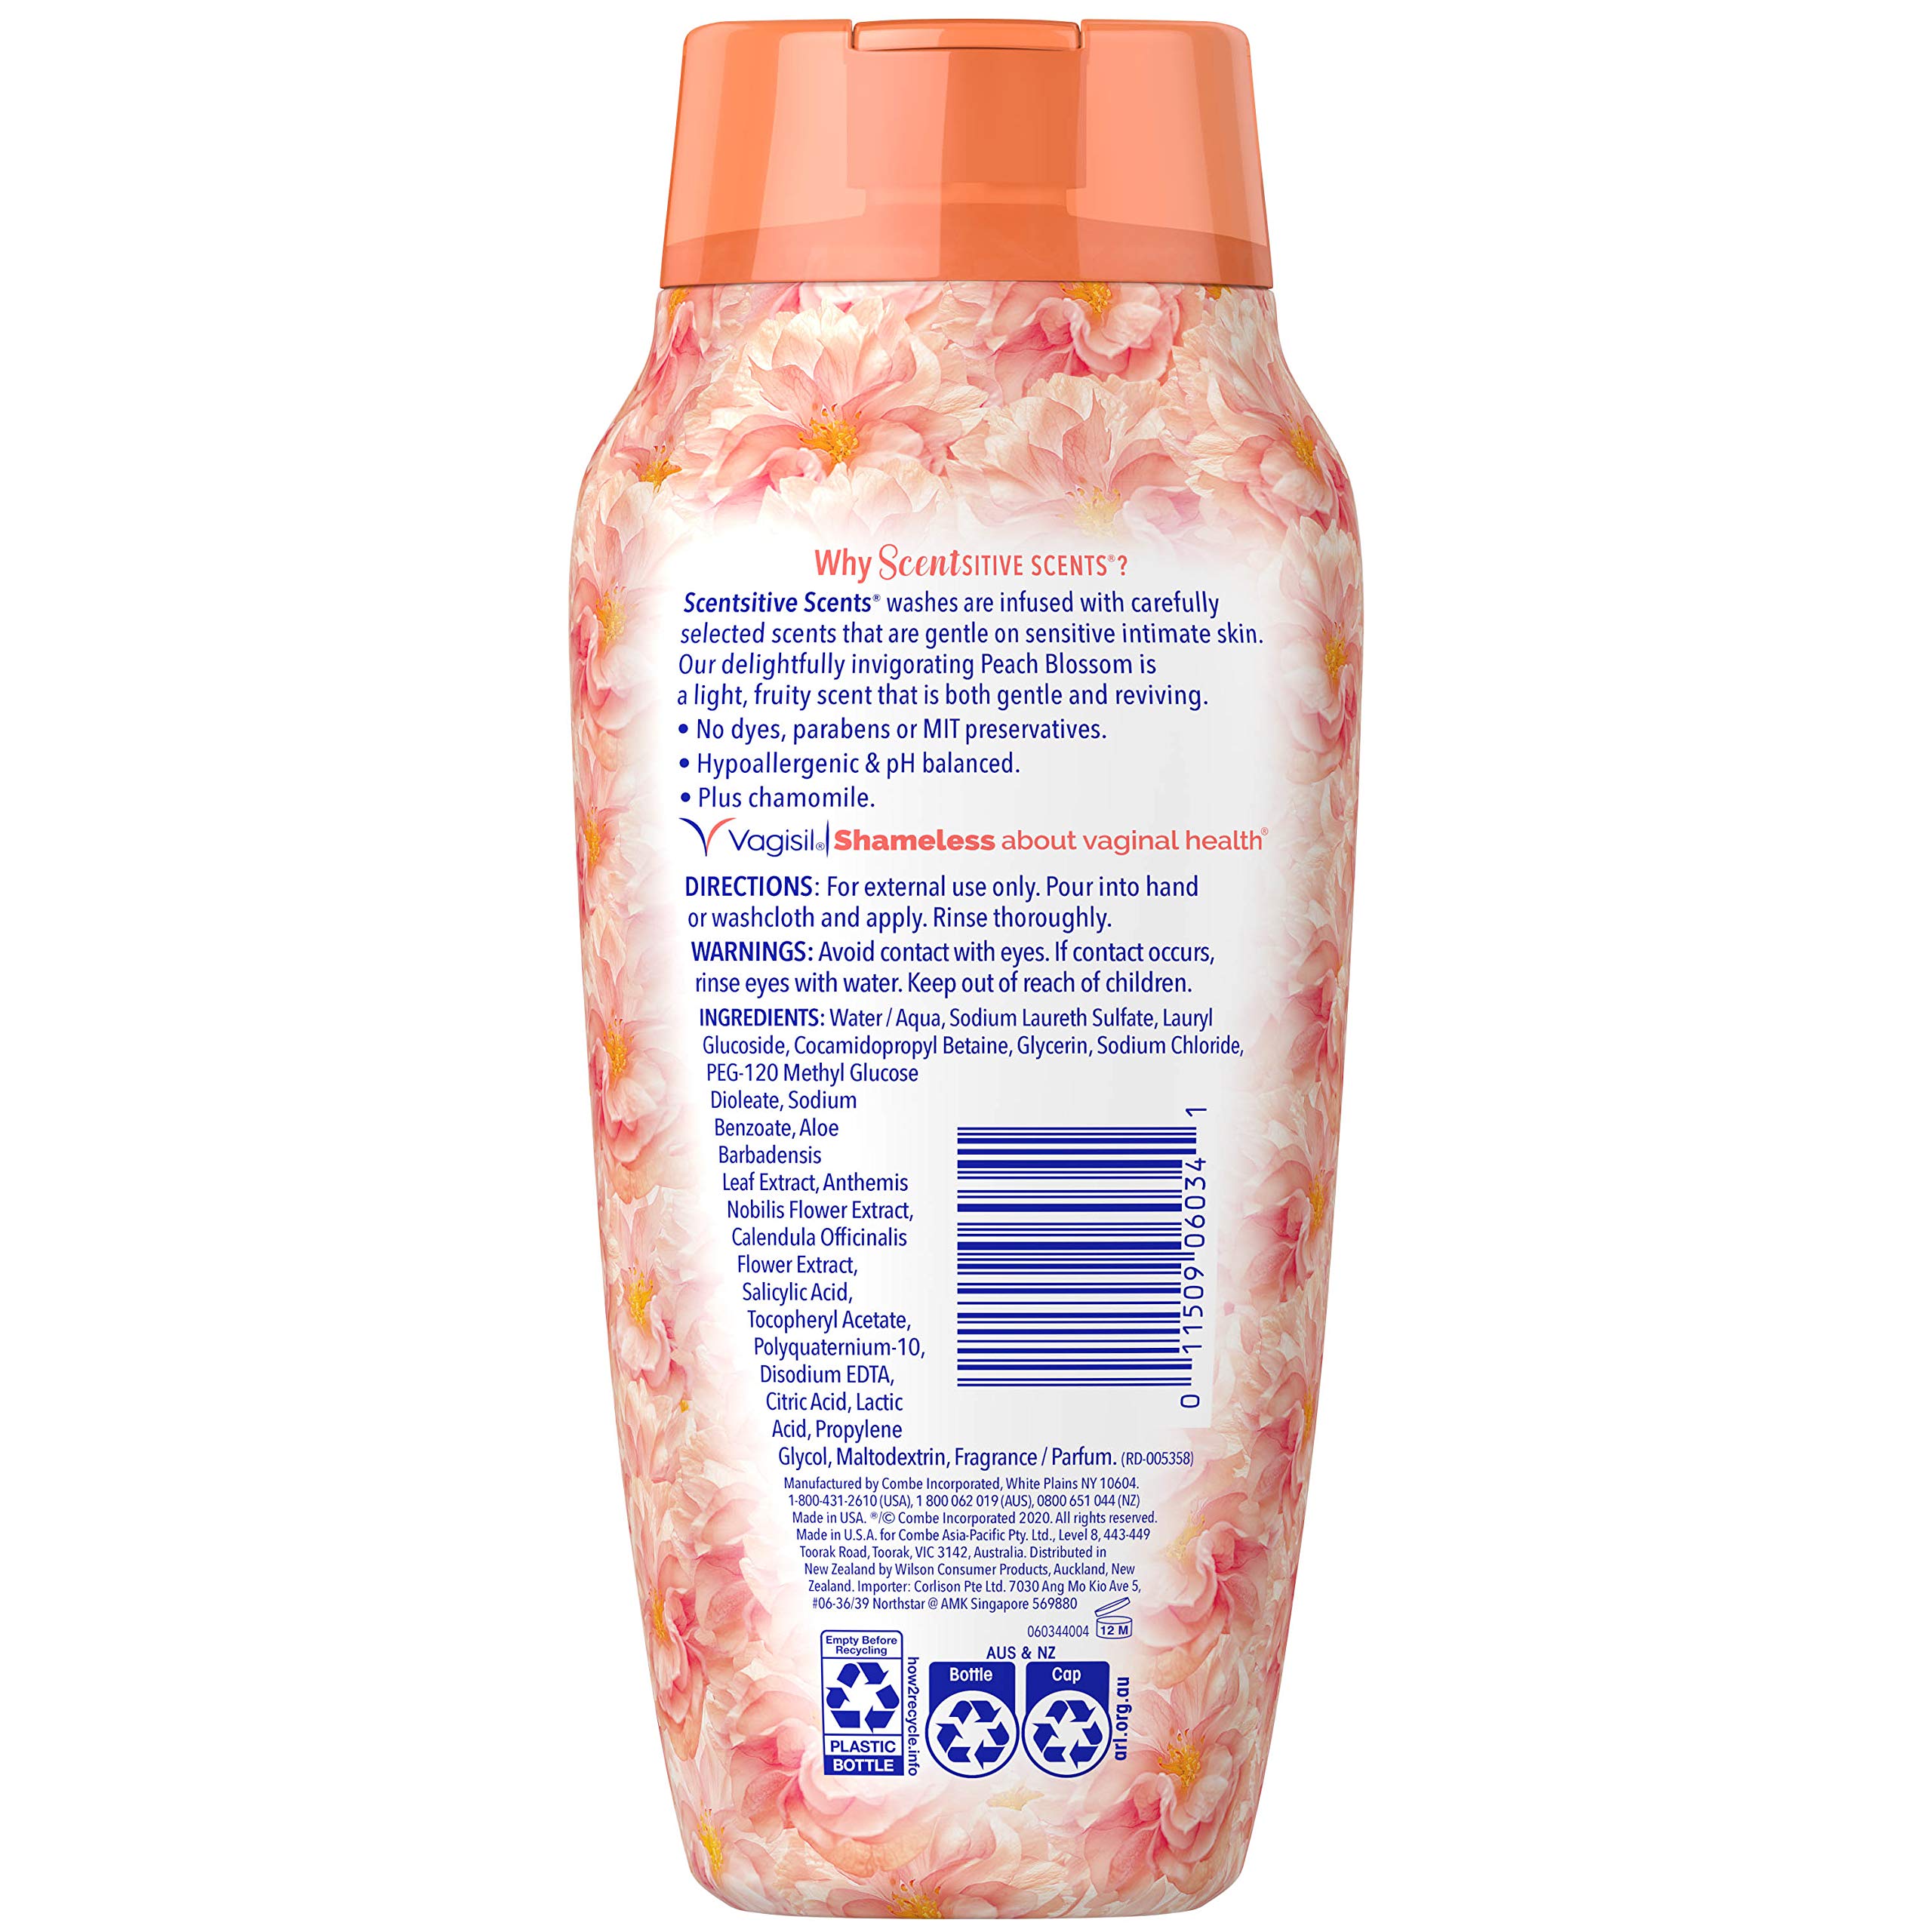 Vagisil Feminine Wash for Intimate Area Hygiene, Scentsitive Scents, pH Balanced and Gynecologist Tested, Peach Blossom, 12 oz (Pack of 1)